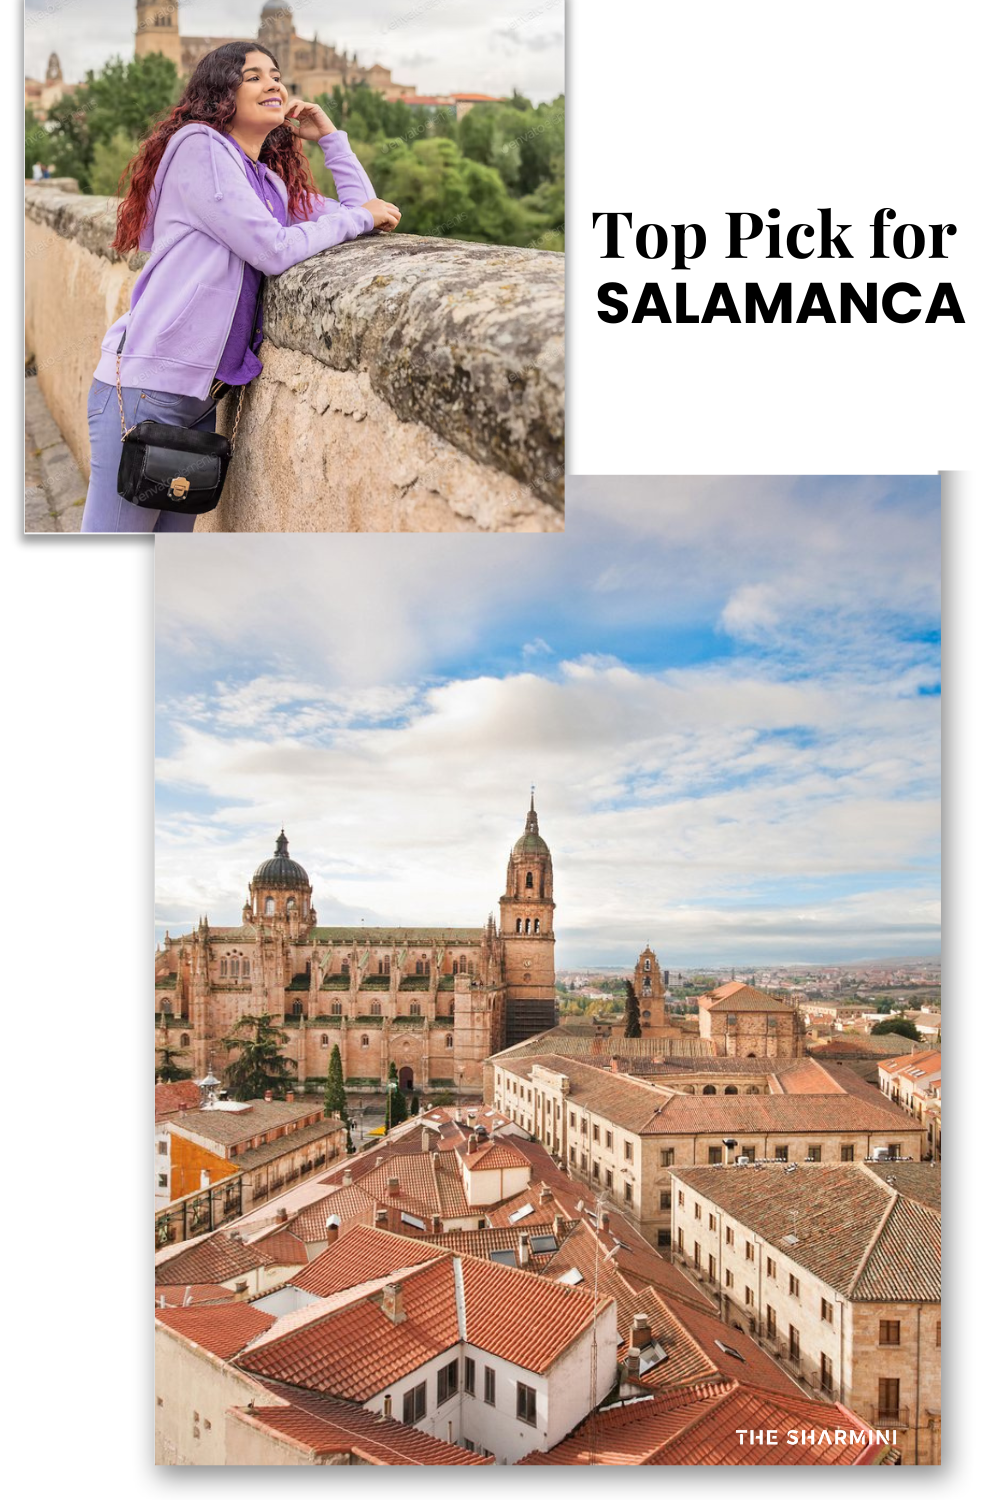 Is Salamanca safe for solo female travelers?